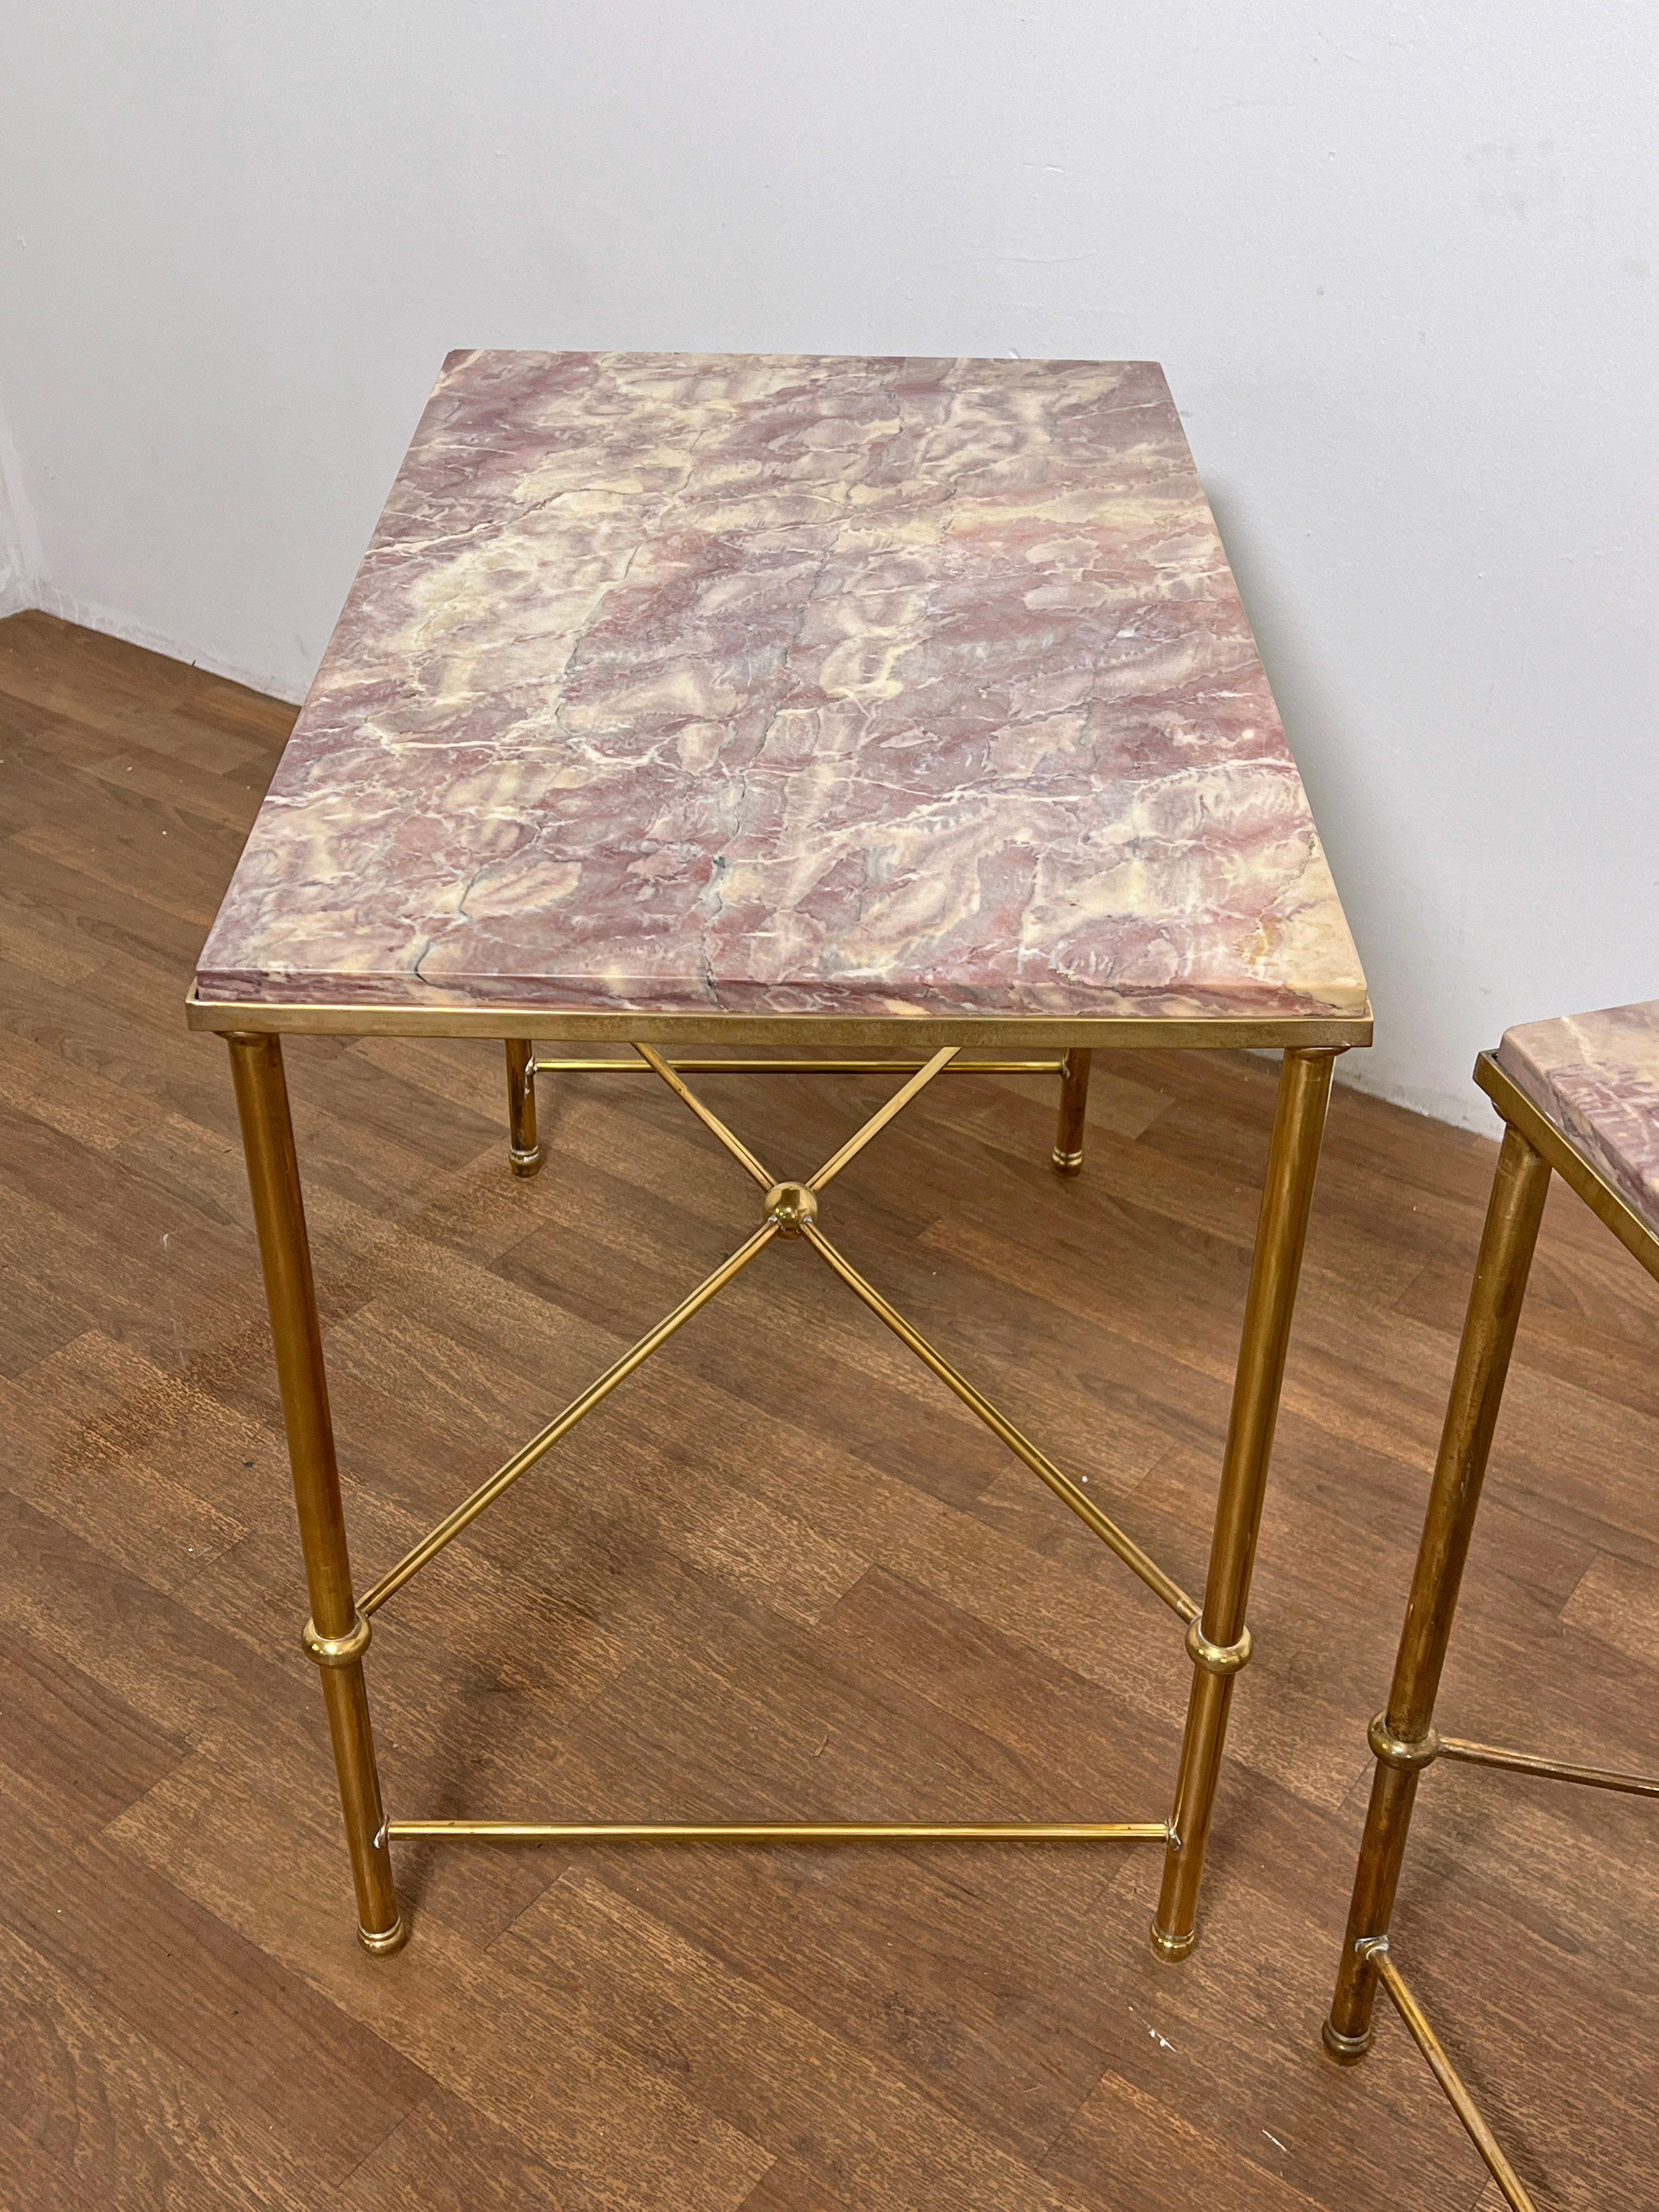 A 1950s solid brass coffee table attributed to Maison Jansen with rare lavender marble top. 
A complementing coffee table with matching marble from the same estate is available in another listing.